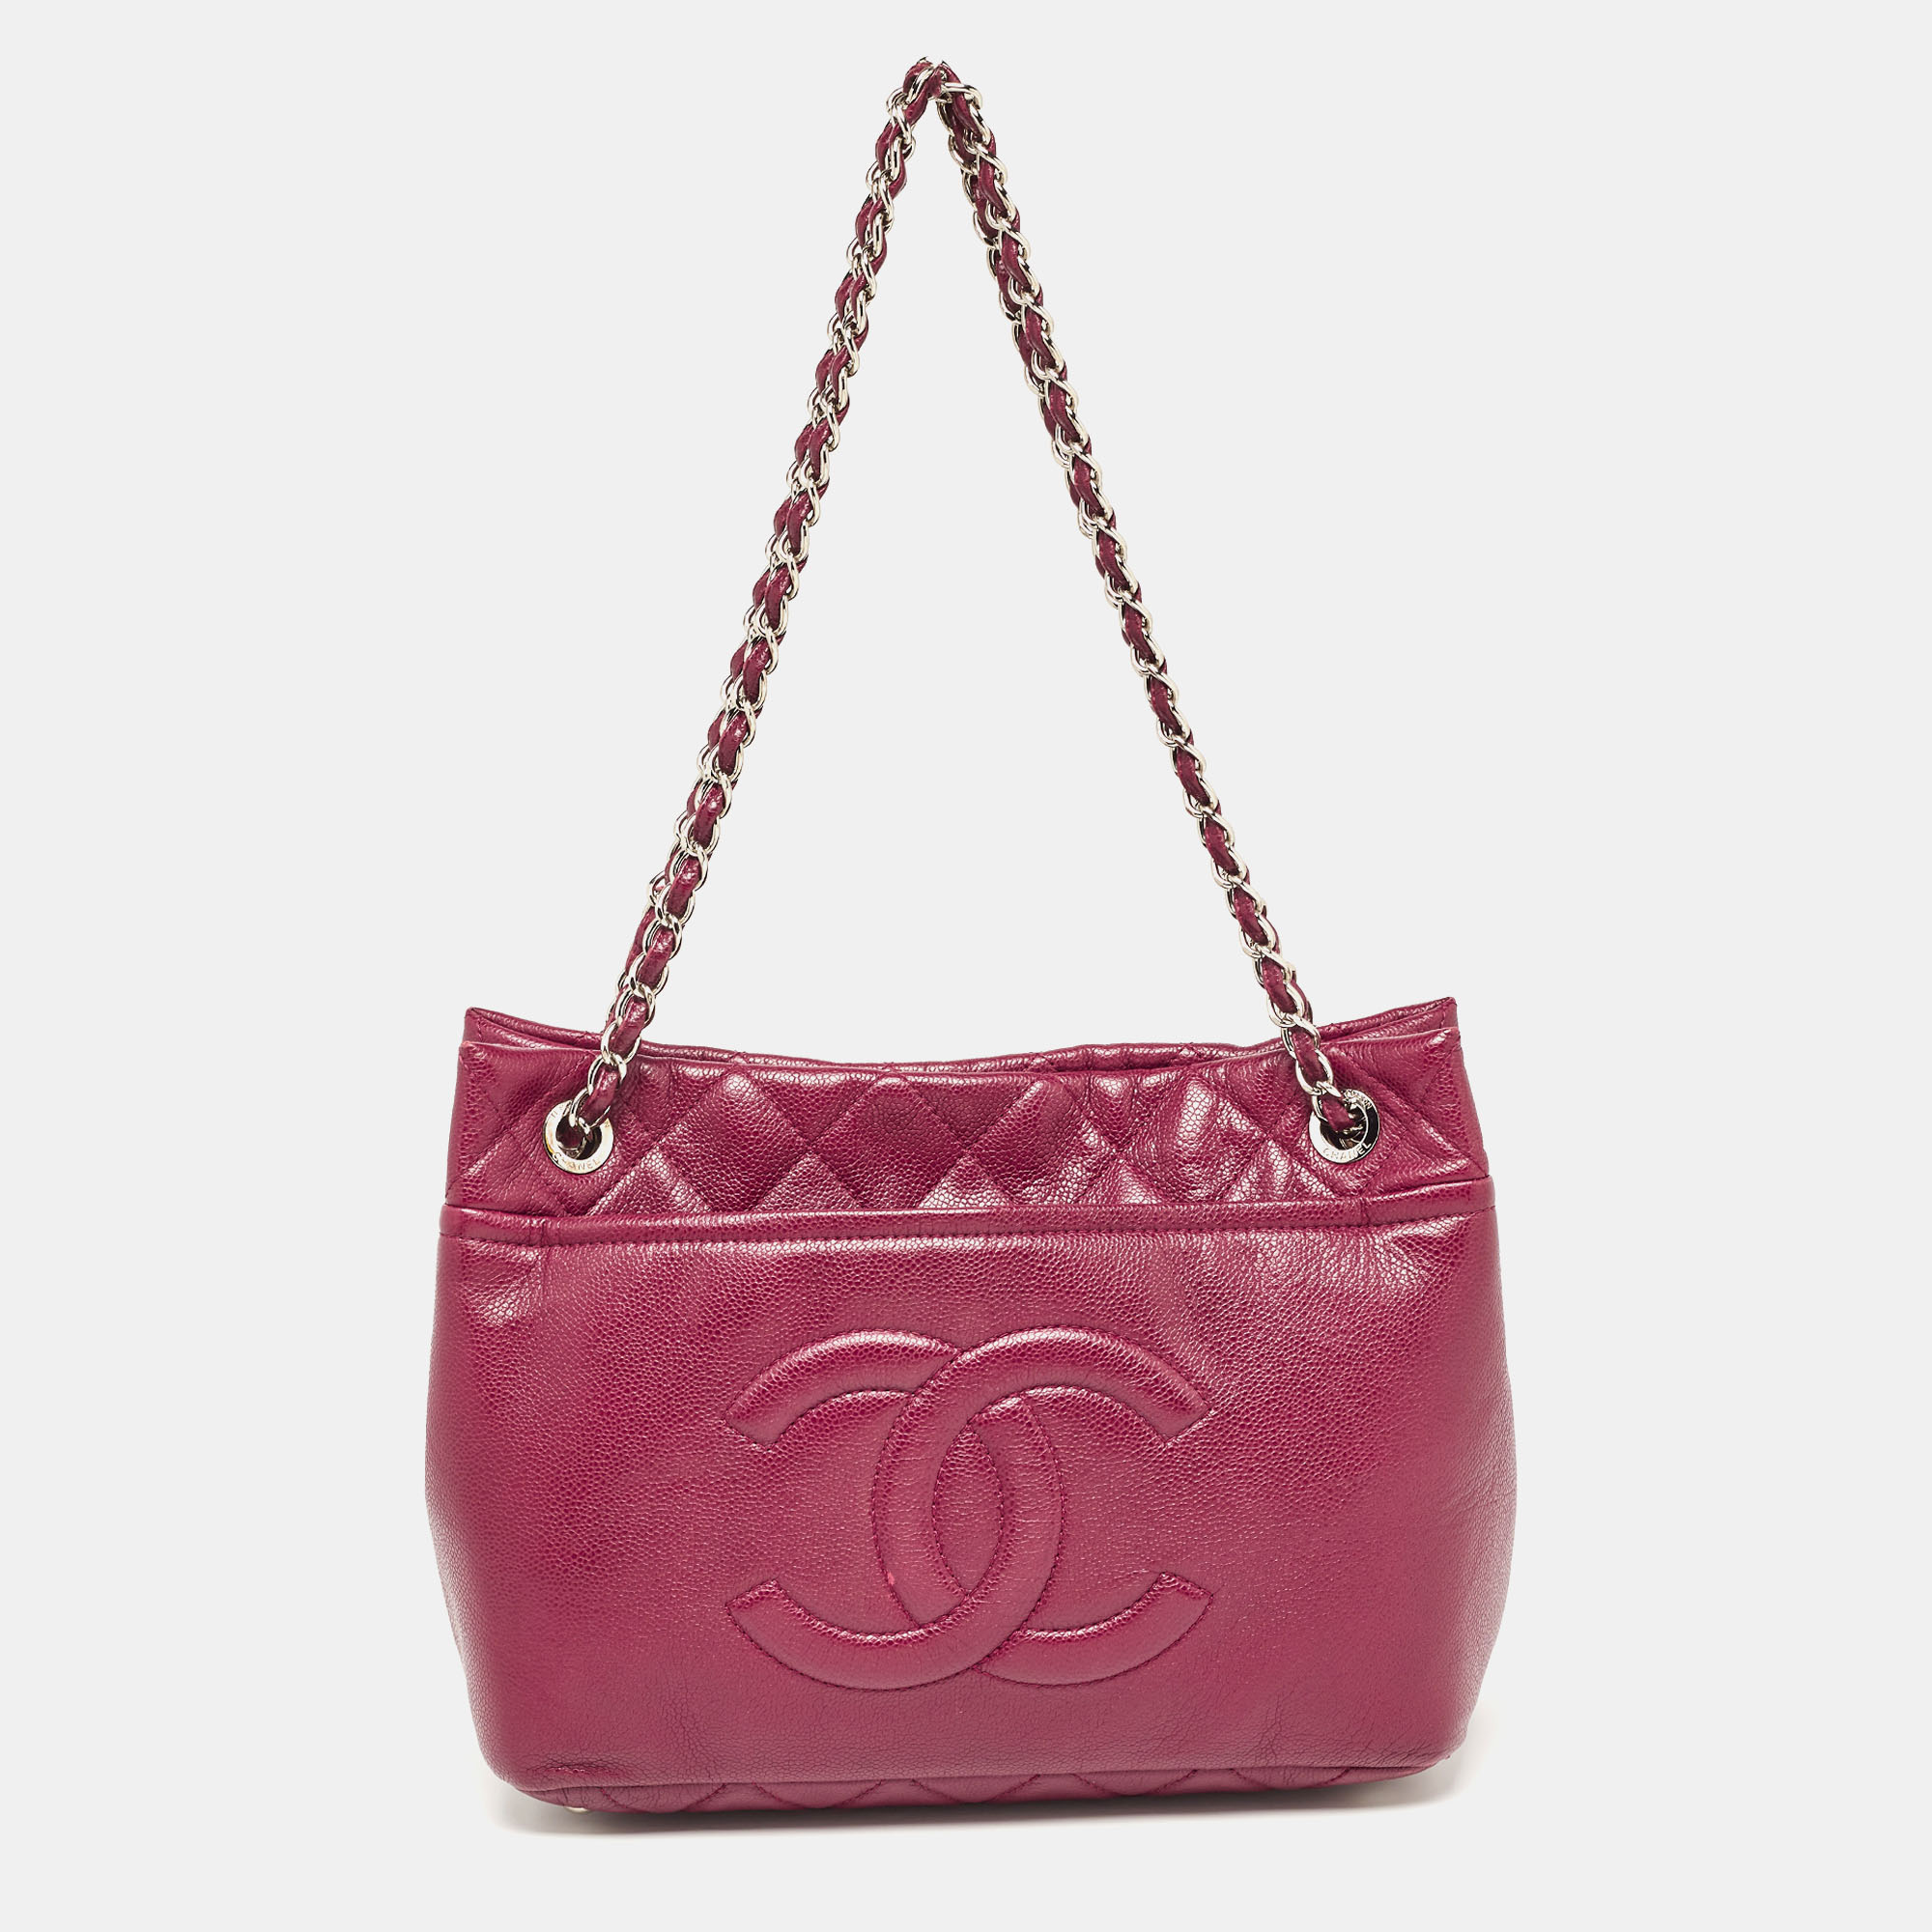 Pre-owned Chanel Dark Red Quilted Caviar Leather Cc Timeless Tote